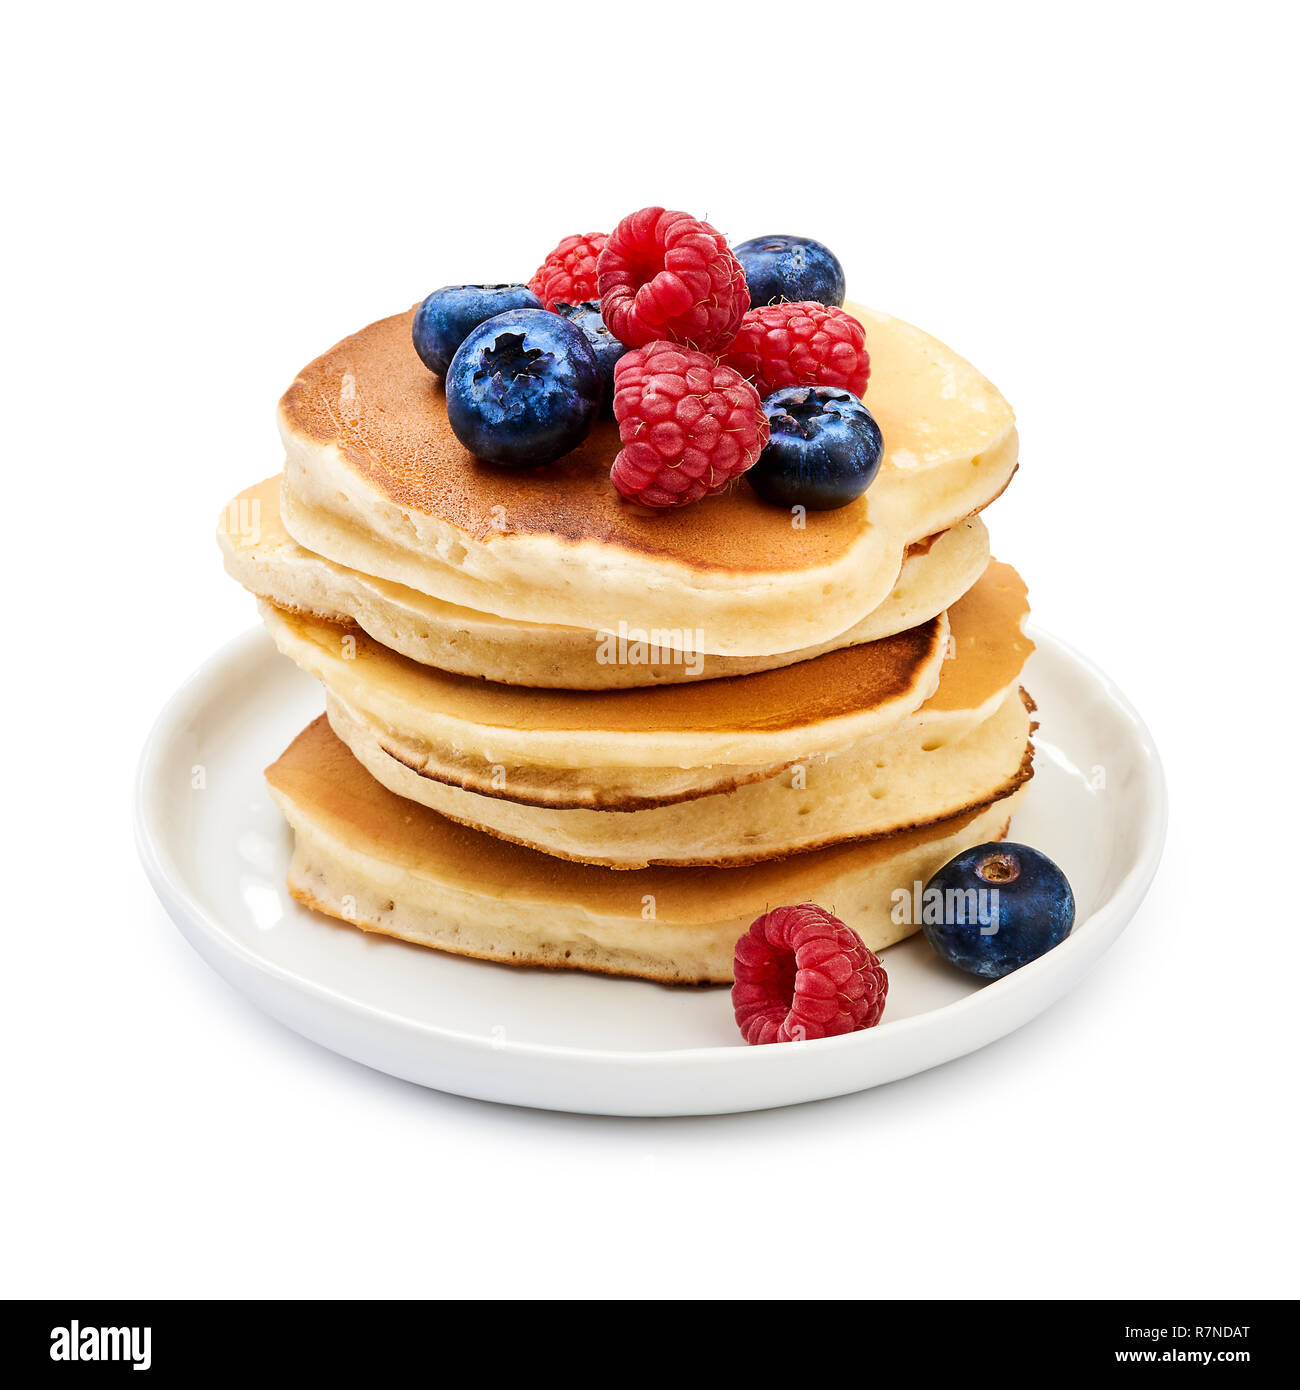 Tasty homemade pancakes with berries on white background Stock Photo